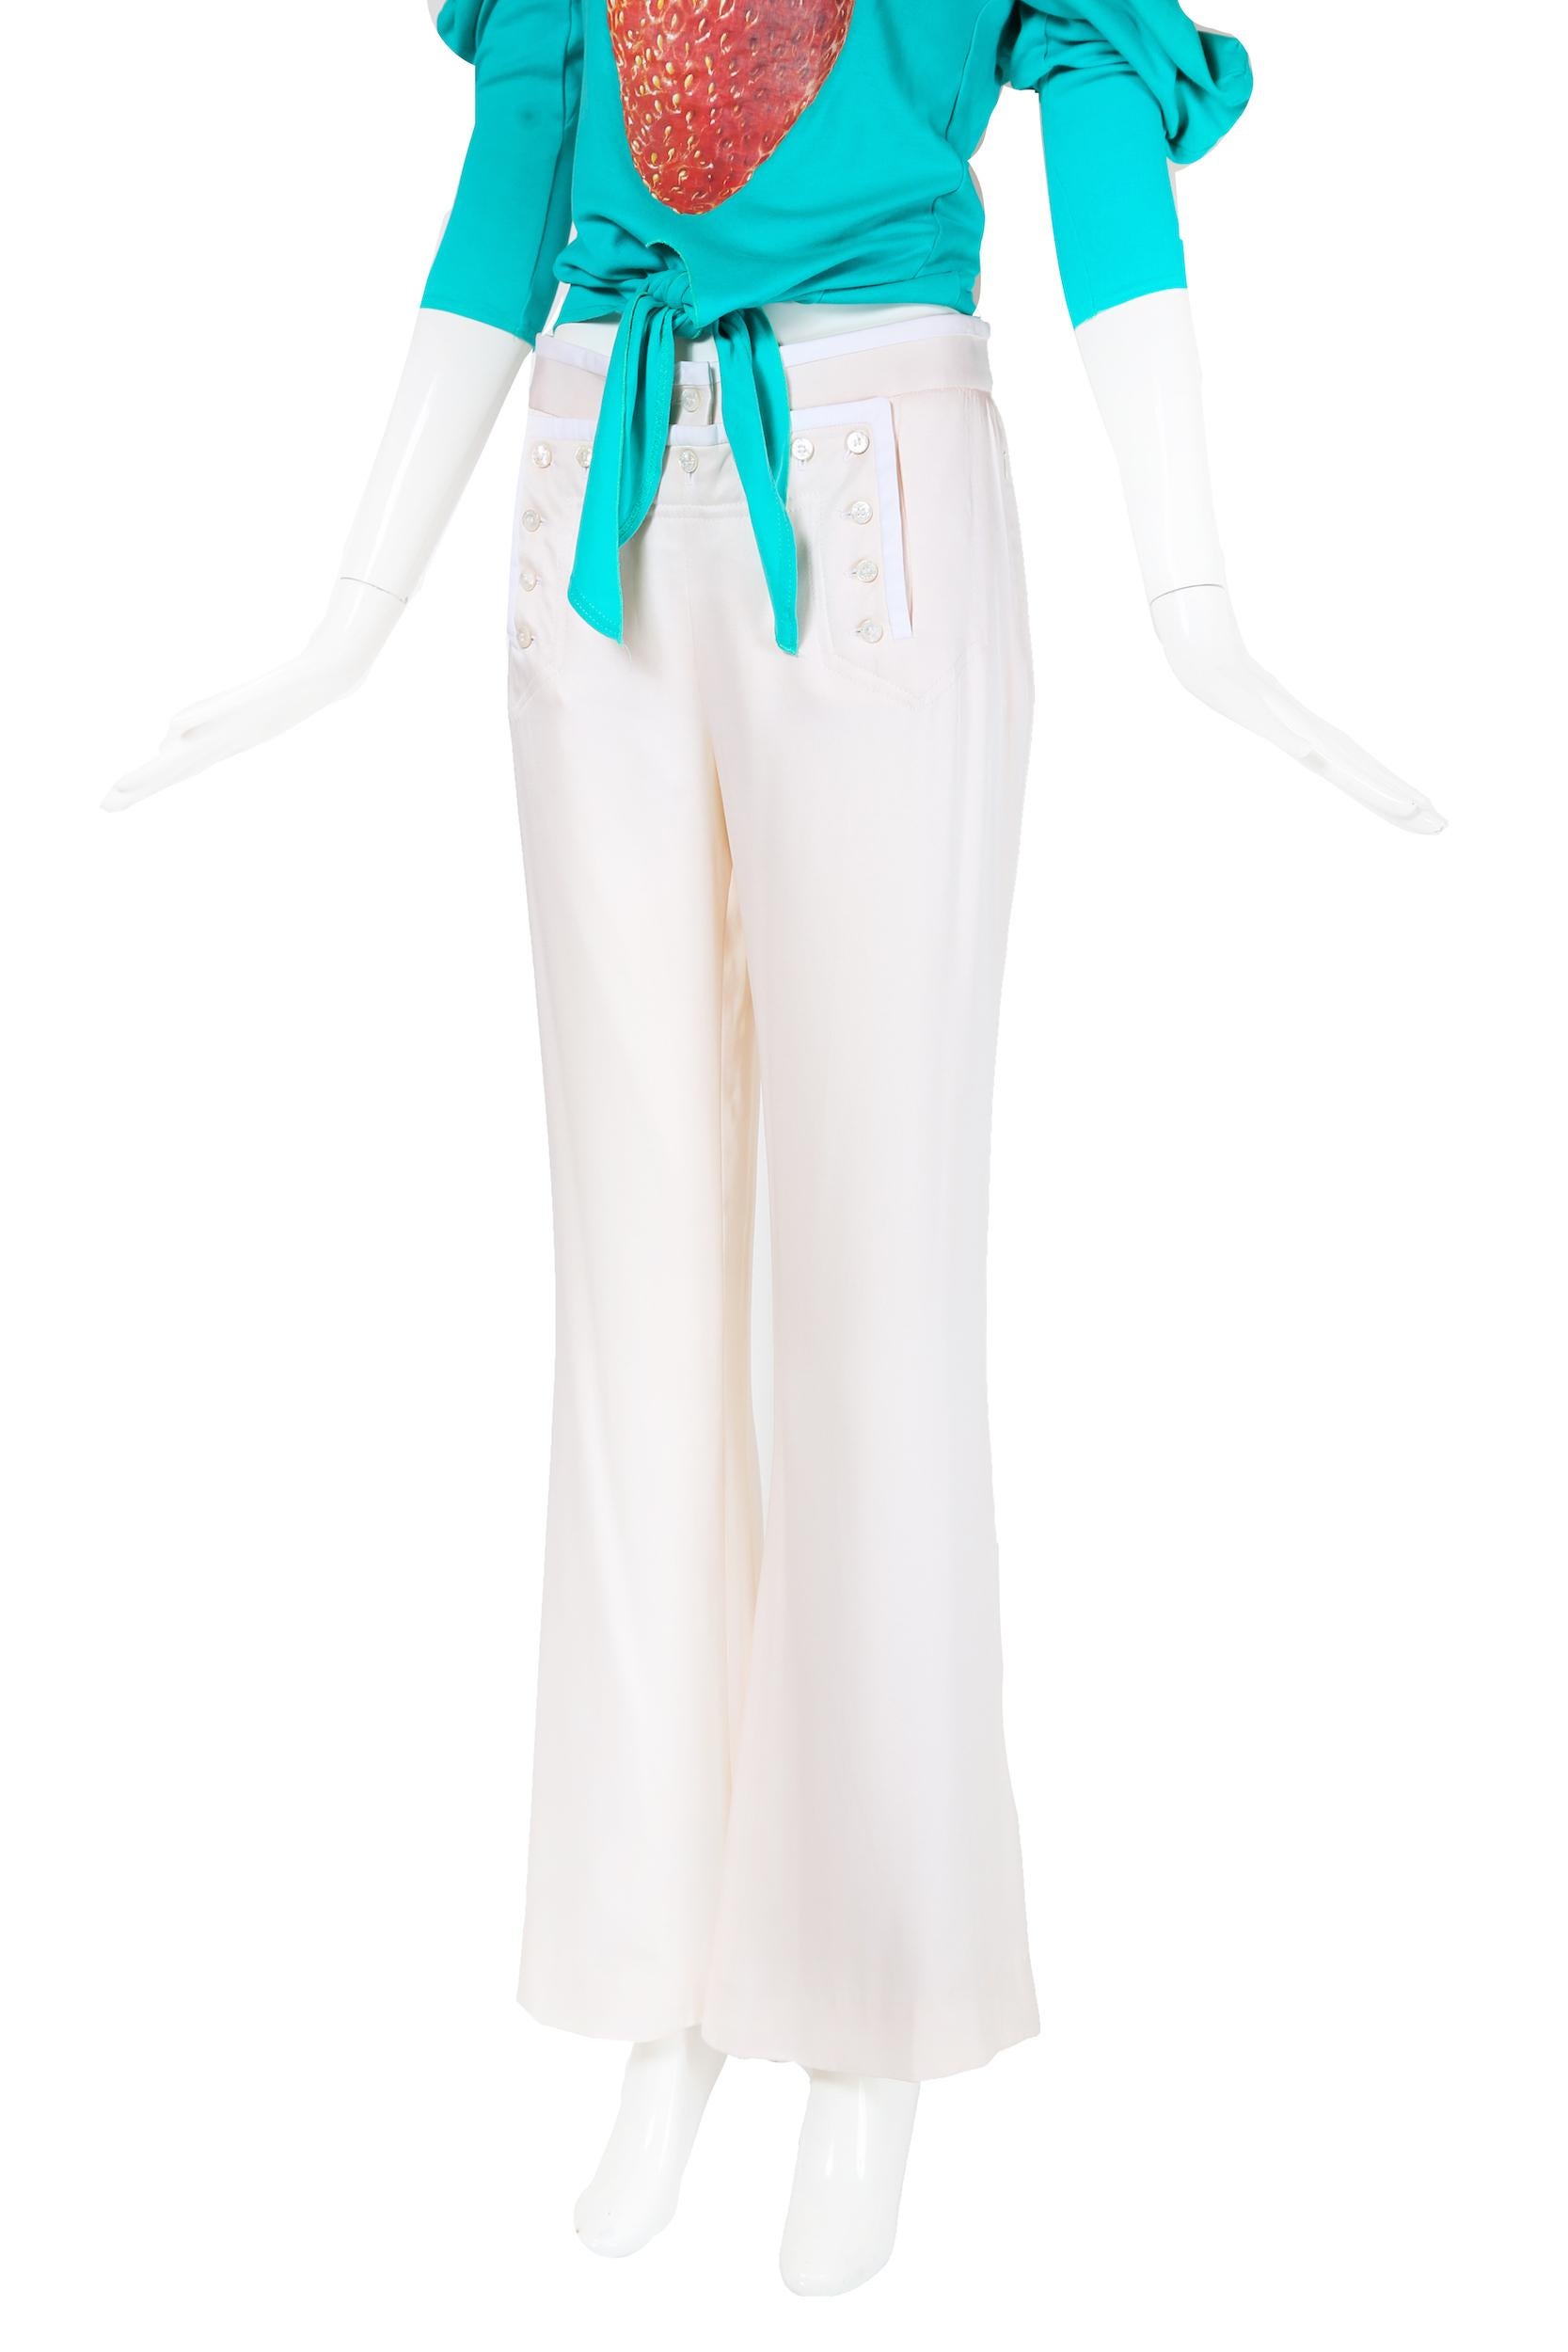 Gianfranco Ferre creme-colored silk pants with a configuration of pearlescent frontal button closures that are reminiscent of sailor pants. Features hidden zipper closure side pockets, white trim at the waist band, frontal buttoned flap and a pant